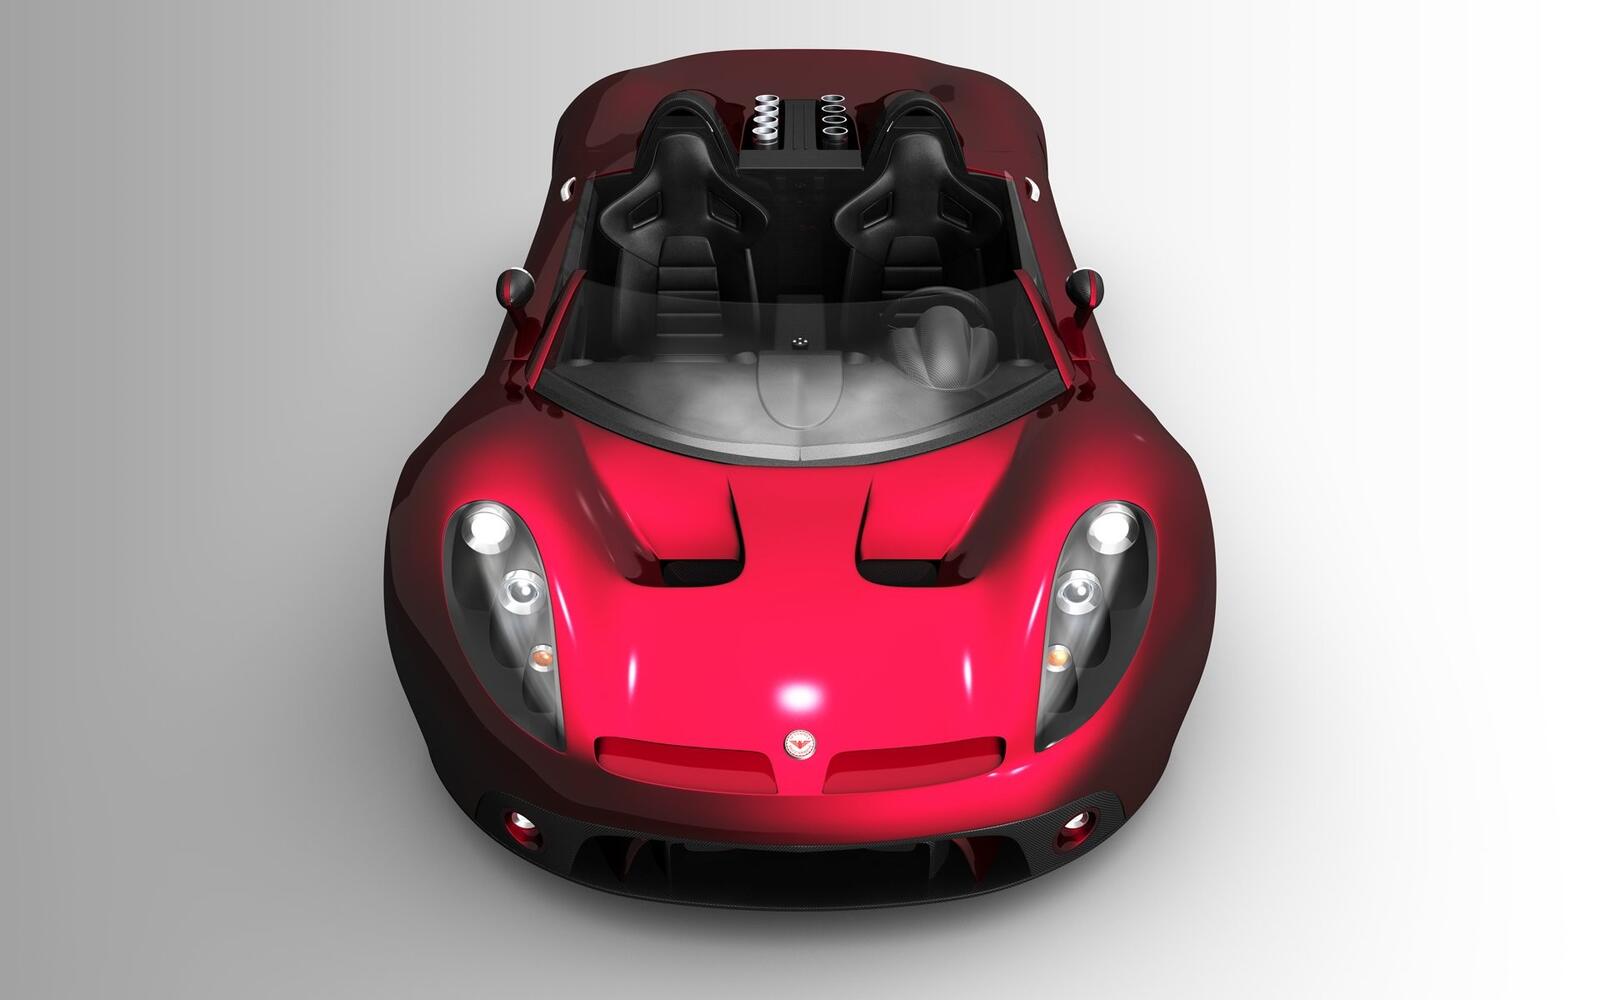 Free photo Lotus concept car in red color